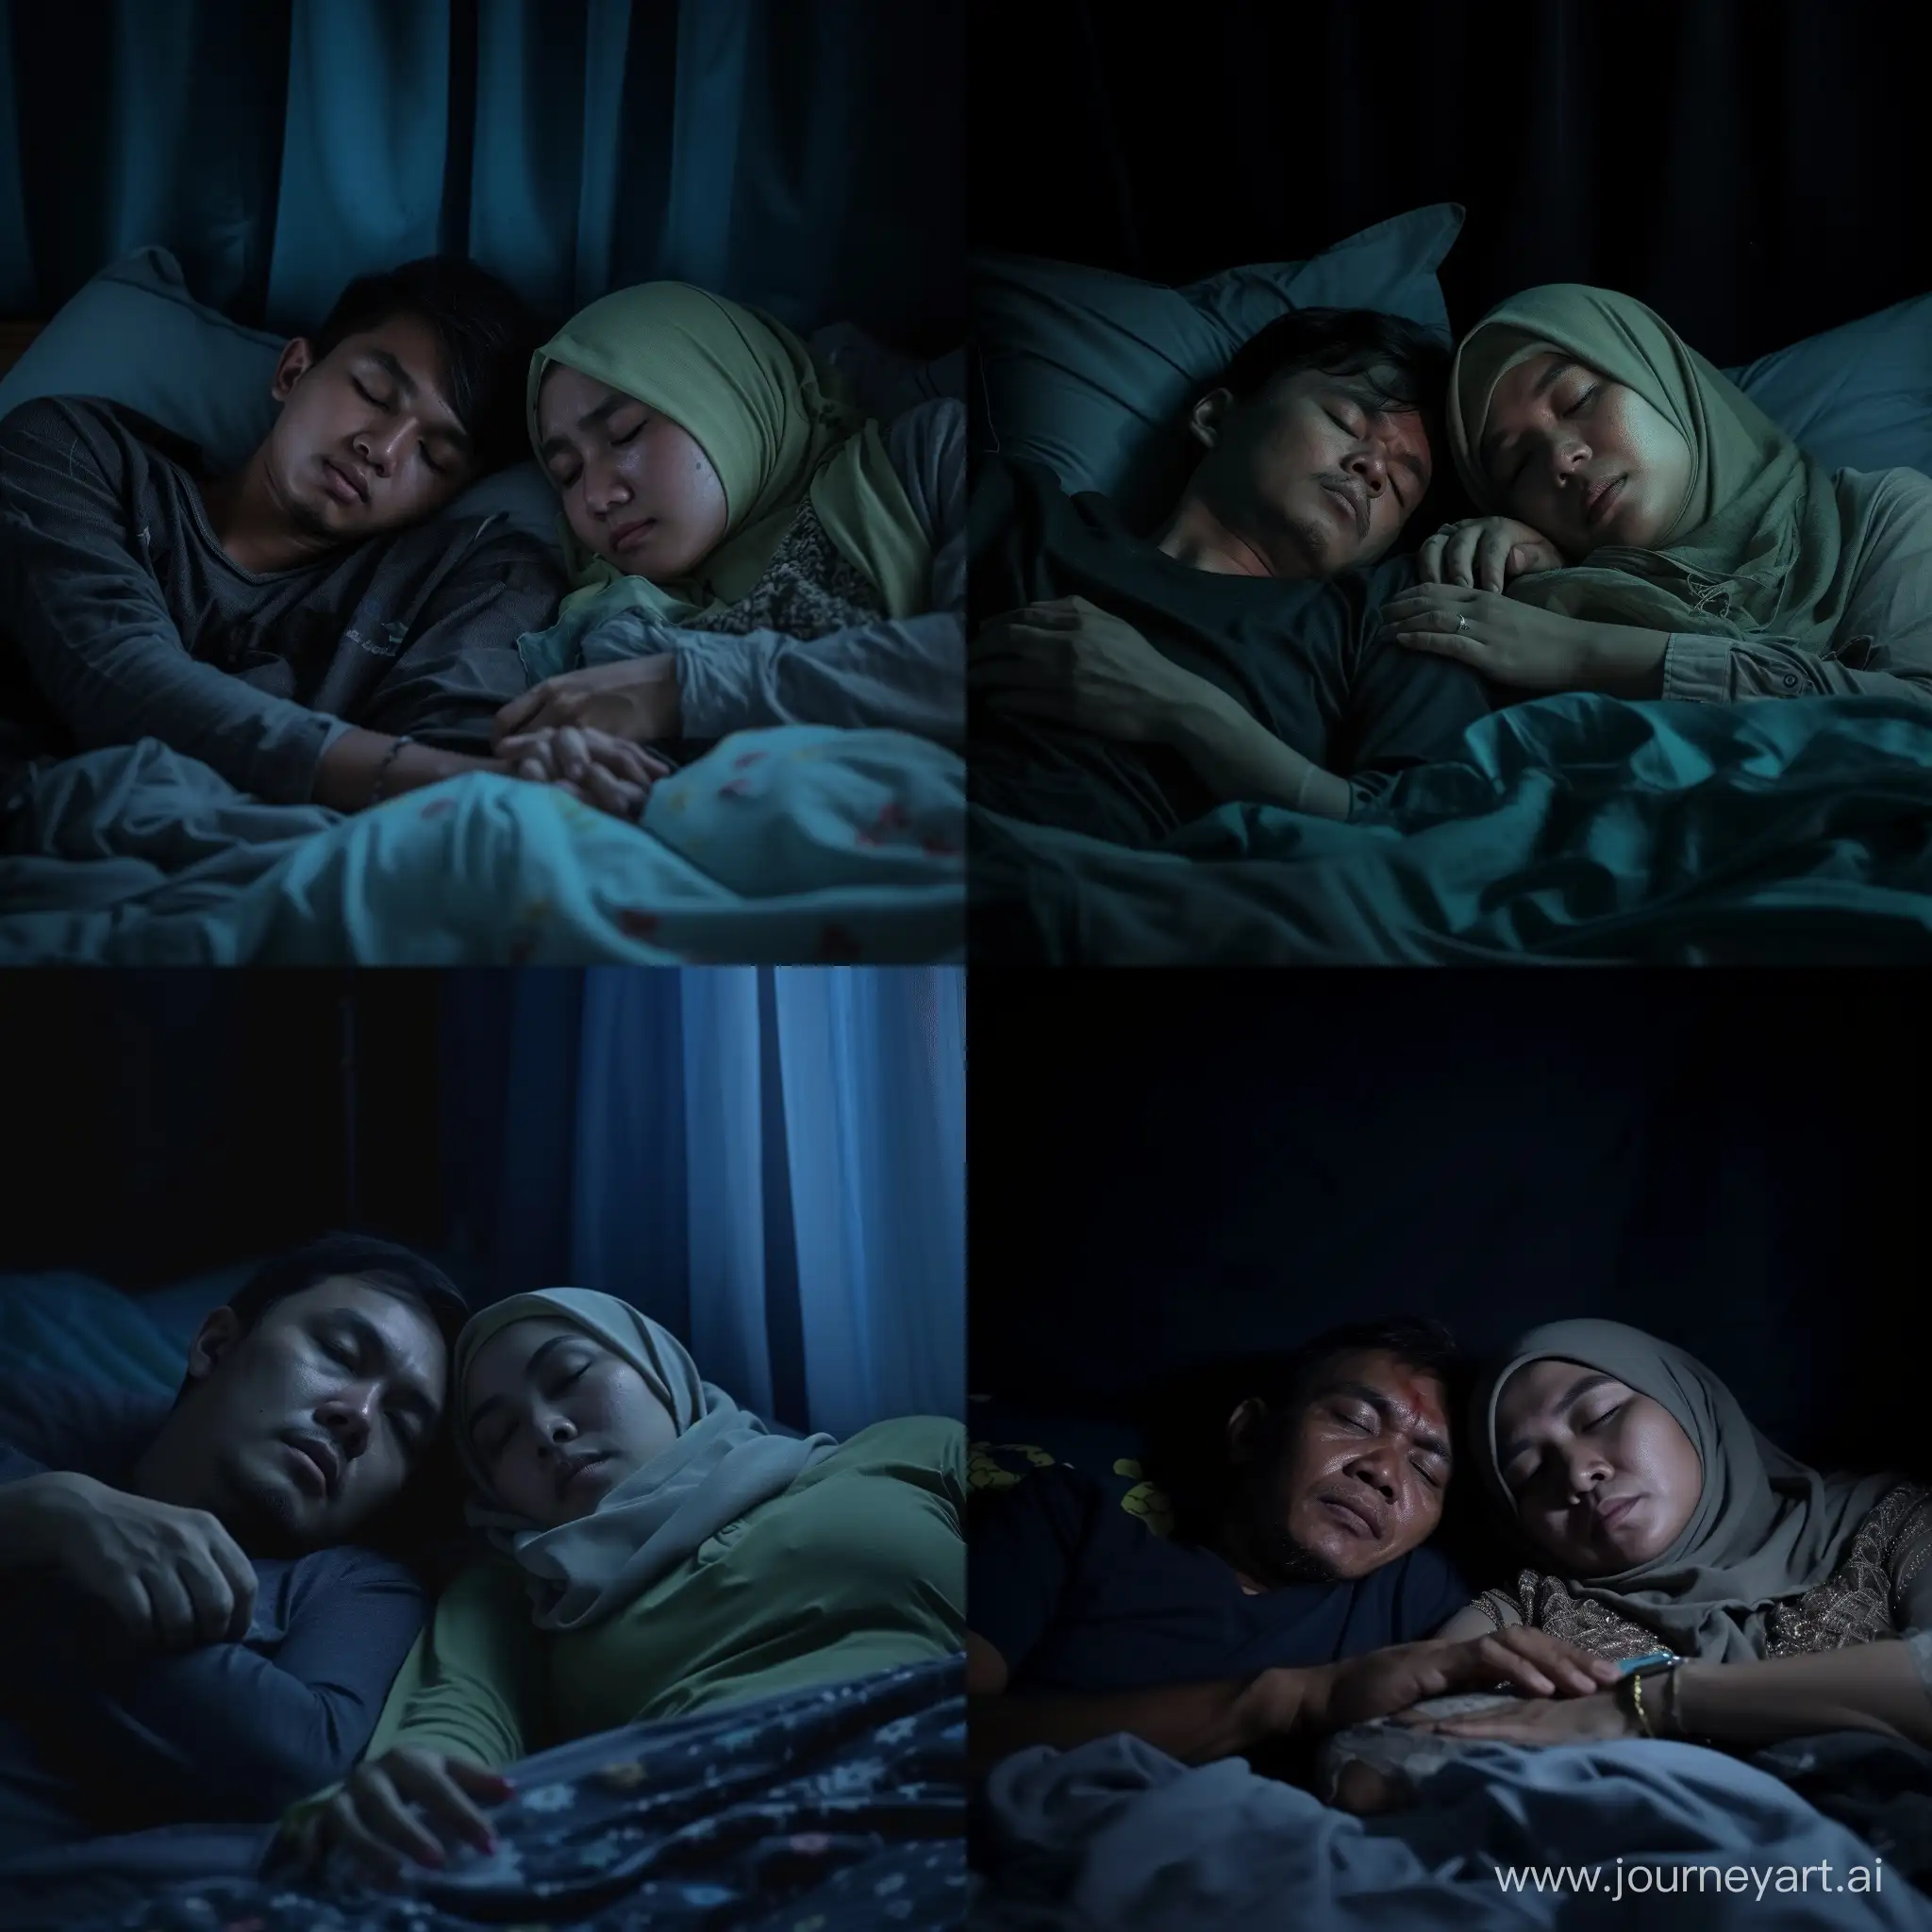 a 30-year-old Indonesian man and a 29-year-old hijab-wearing woman were sleeping in a dark room, front view, horor movie scene